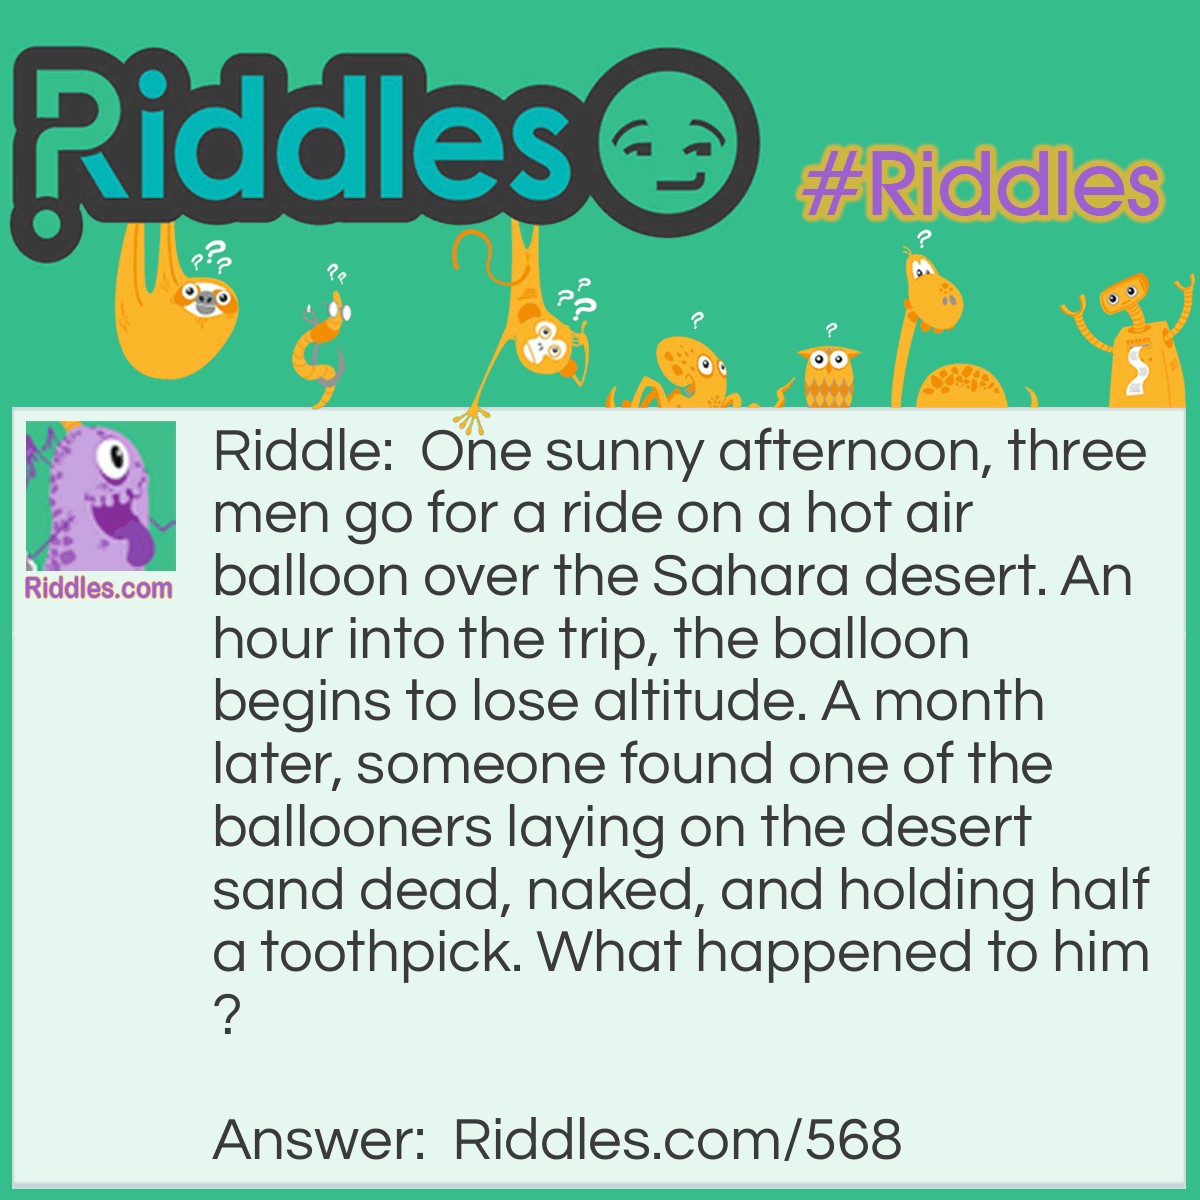 Riddle: One sunny afternoon, three men go for a ride on a hot air balloon over the Sahara desert. An hour into the trip, the balloon begins to lose altitude. A month later, someone found one of the ballooners laying on the desert sand dead, naked, and holding half a toothpick. What happened to him? Answer: As the balloon lost altitude, the men took of their clothes and threw them overboard to decrease the weight of the balloon. The balloon continued to drop so the men drew straws to see who would be forced to jump. The dead man in the desert drew the shortest one (the half toothpick).